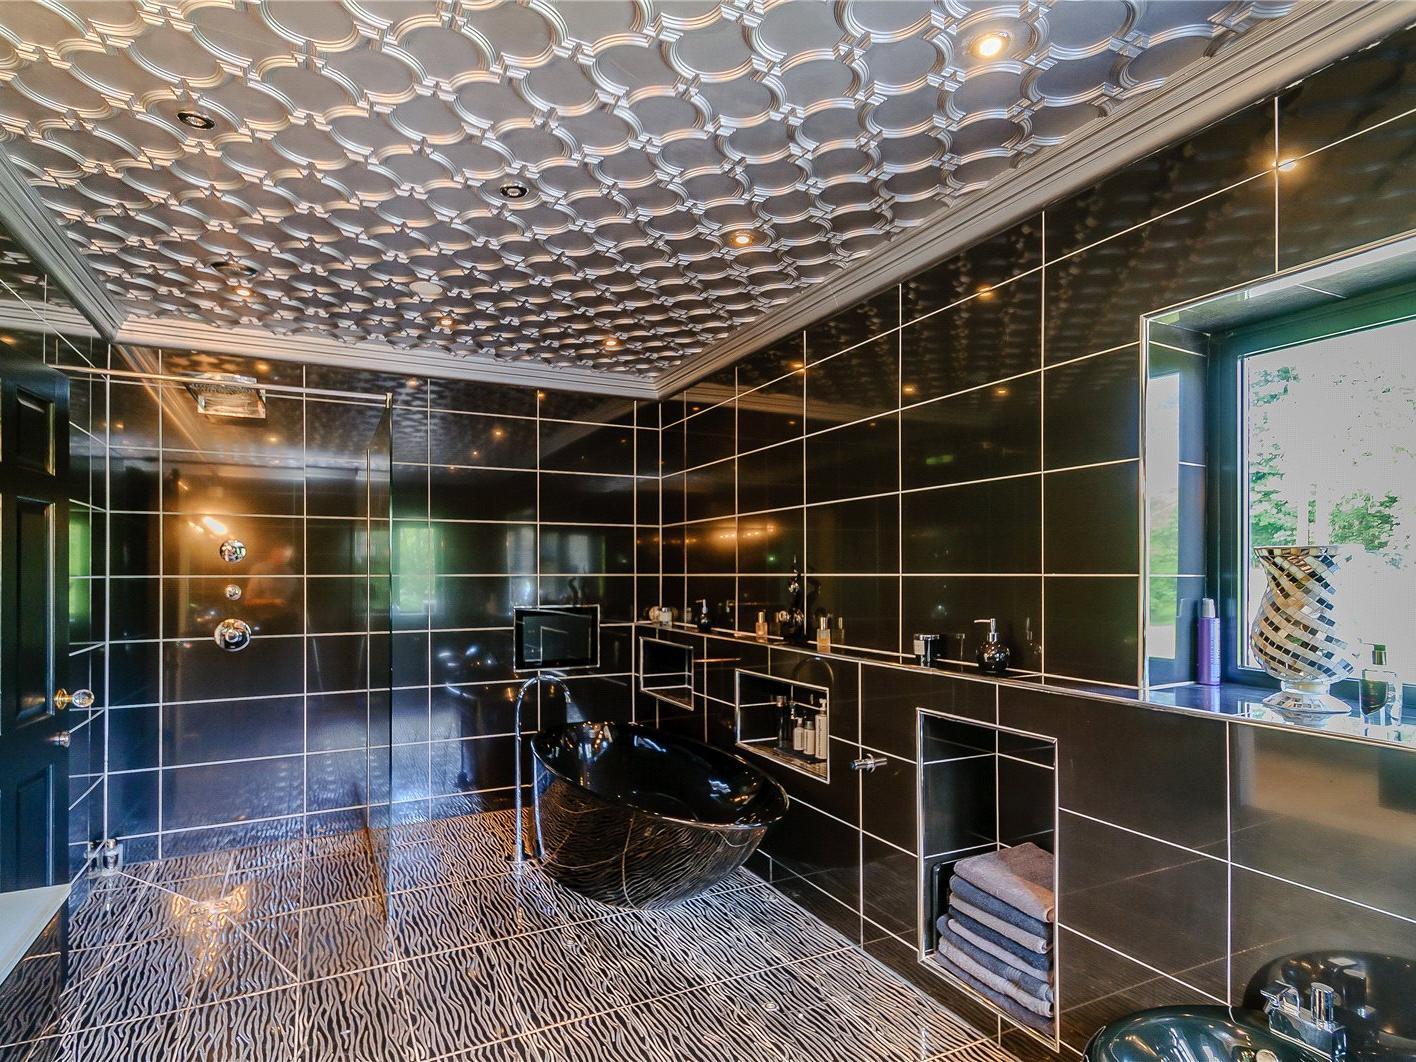 The master bedroom has an en-suite bathroom with a full suite, including an oval shape stand-alone bath with aqua TV and wet room style shower behind glazed screens.